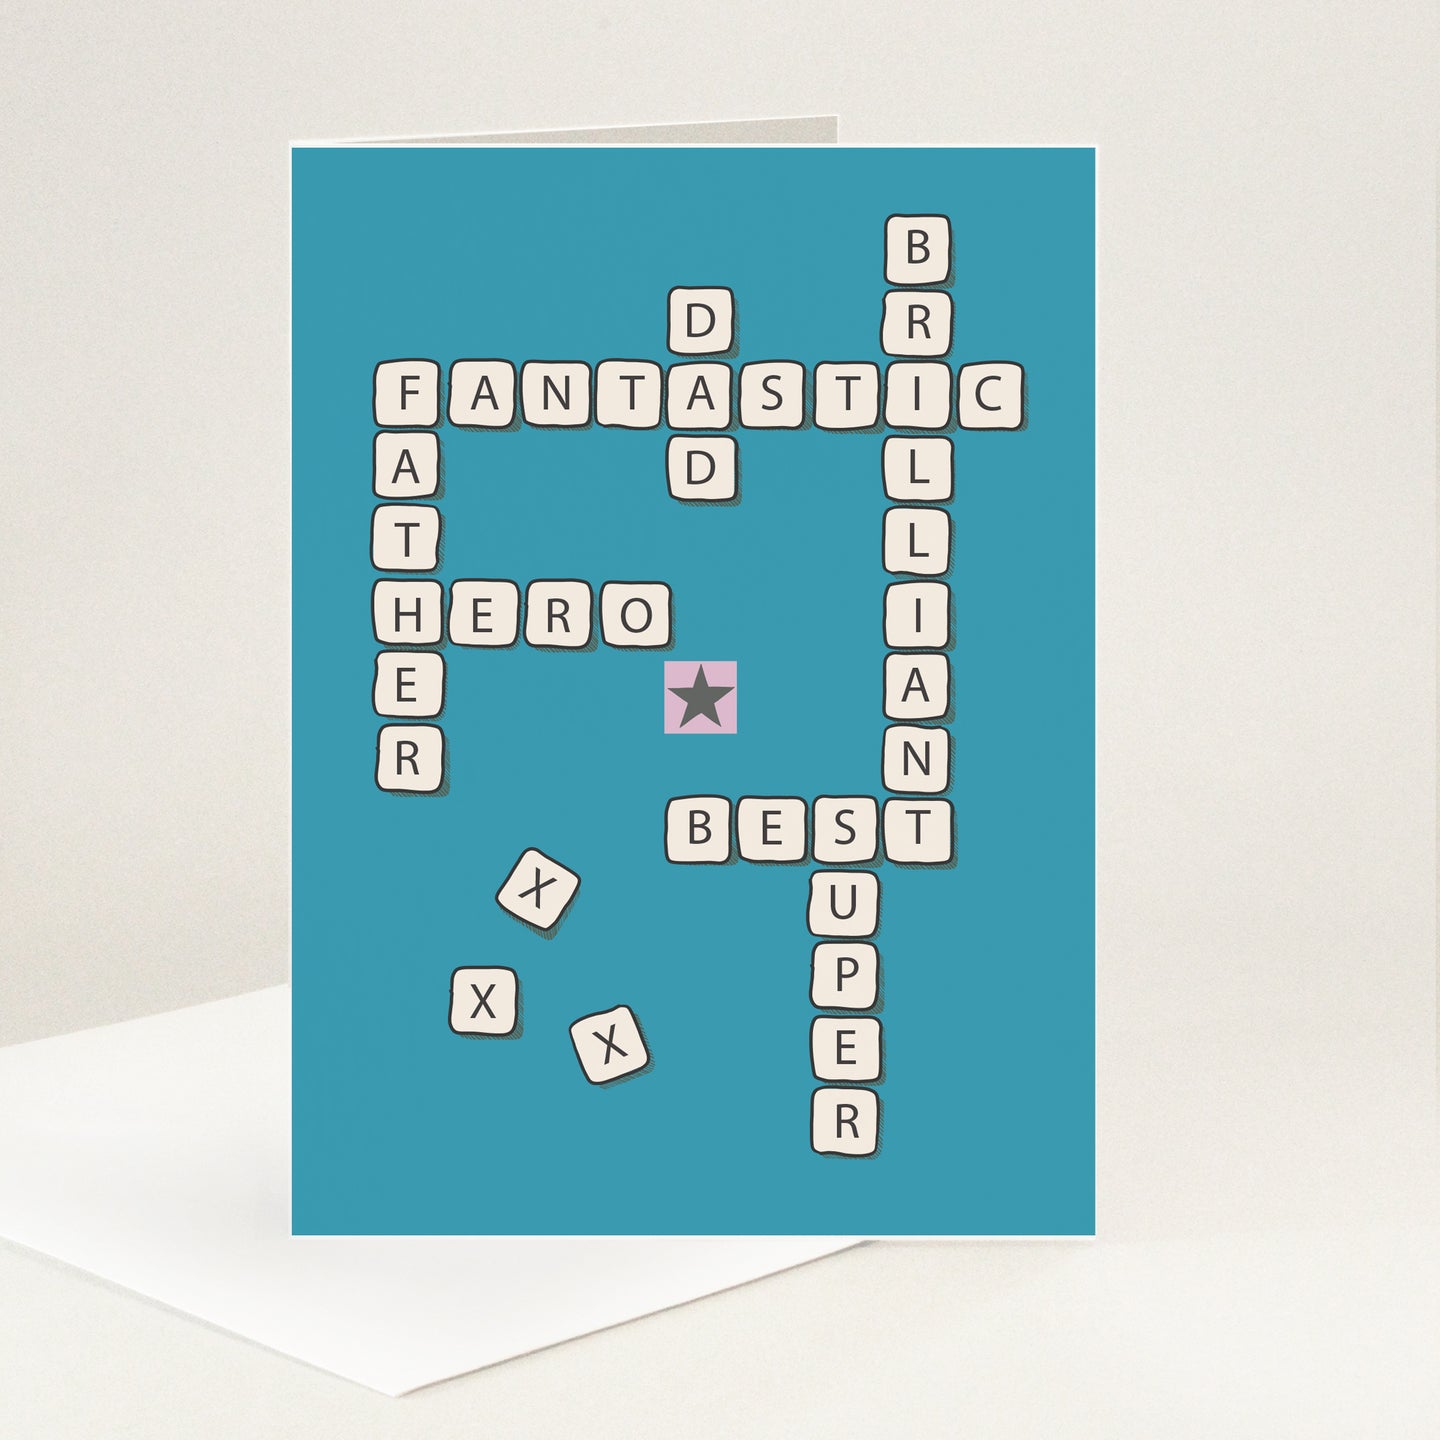 Drawn letter tiles game arranged to form the words brilliant, best, hero, father, dad, fantastic and super. Off-white tiles on blue background.